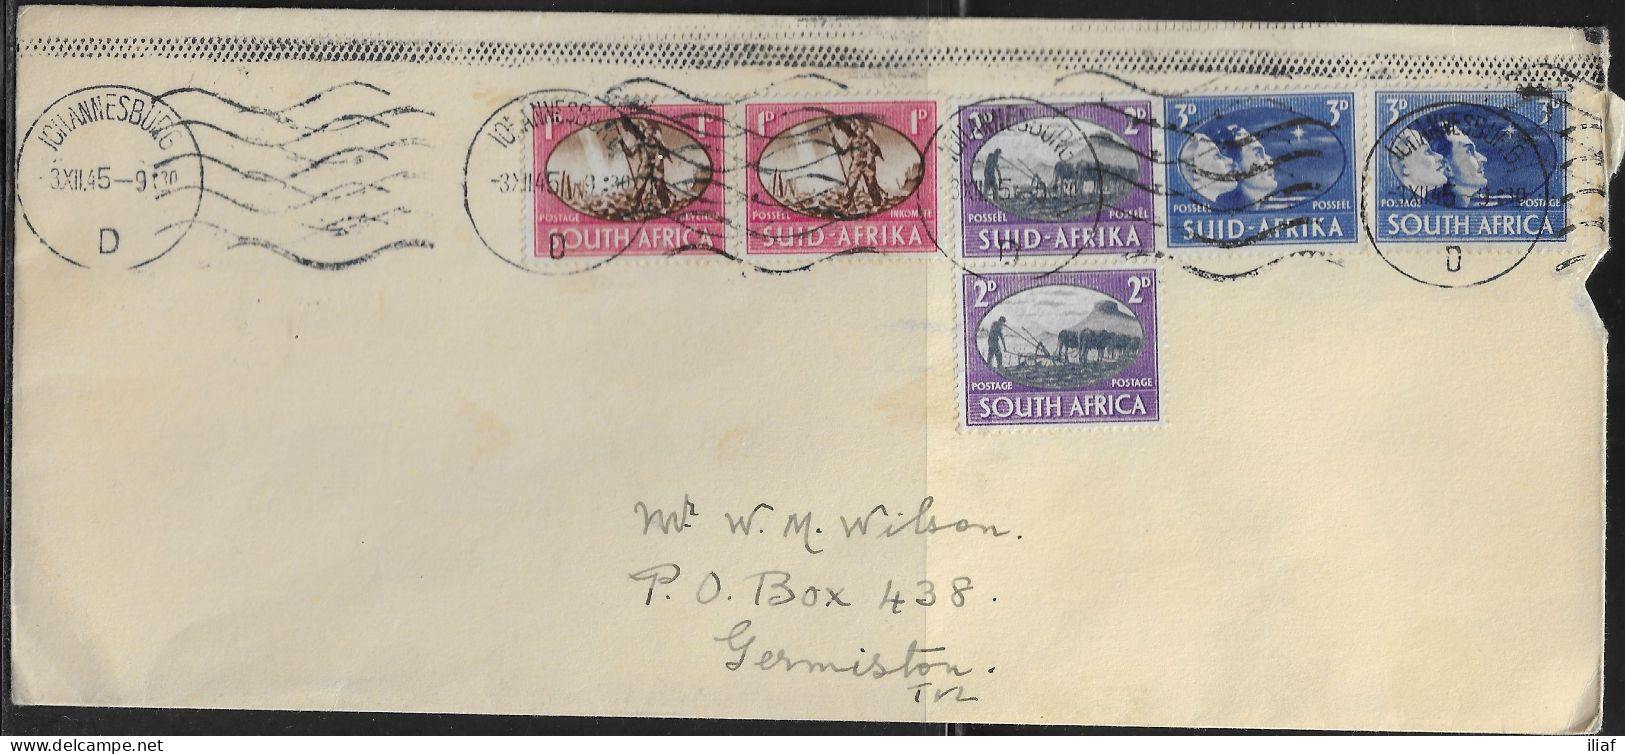 South Africa. Stamps Sc. 100-102 On Commercial Letter, Sent From Johannesburg At 3.12.1945 To Germiston. - Covers & Documents